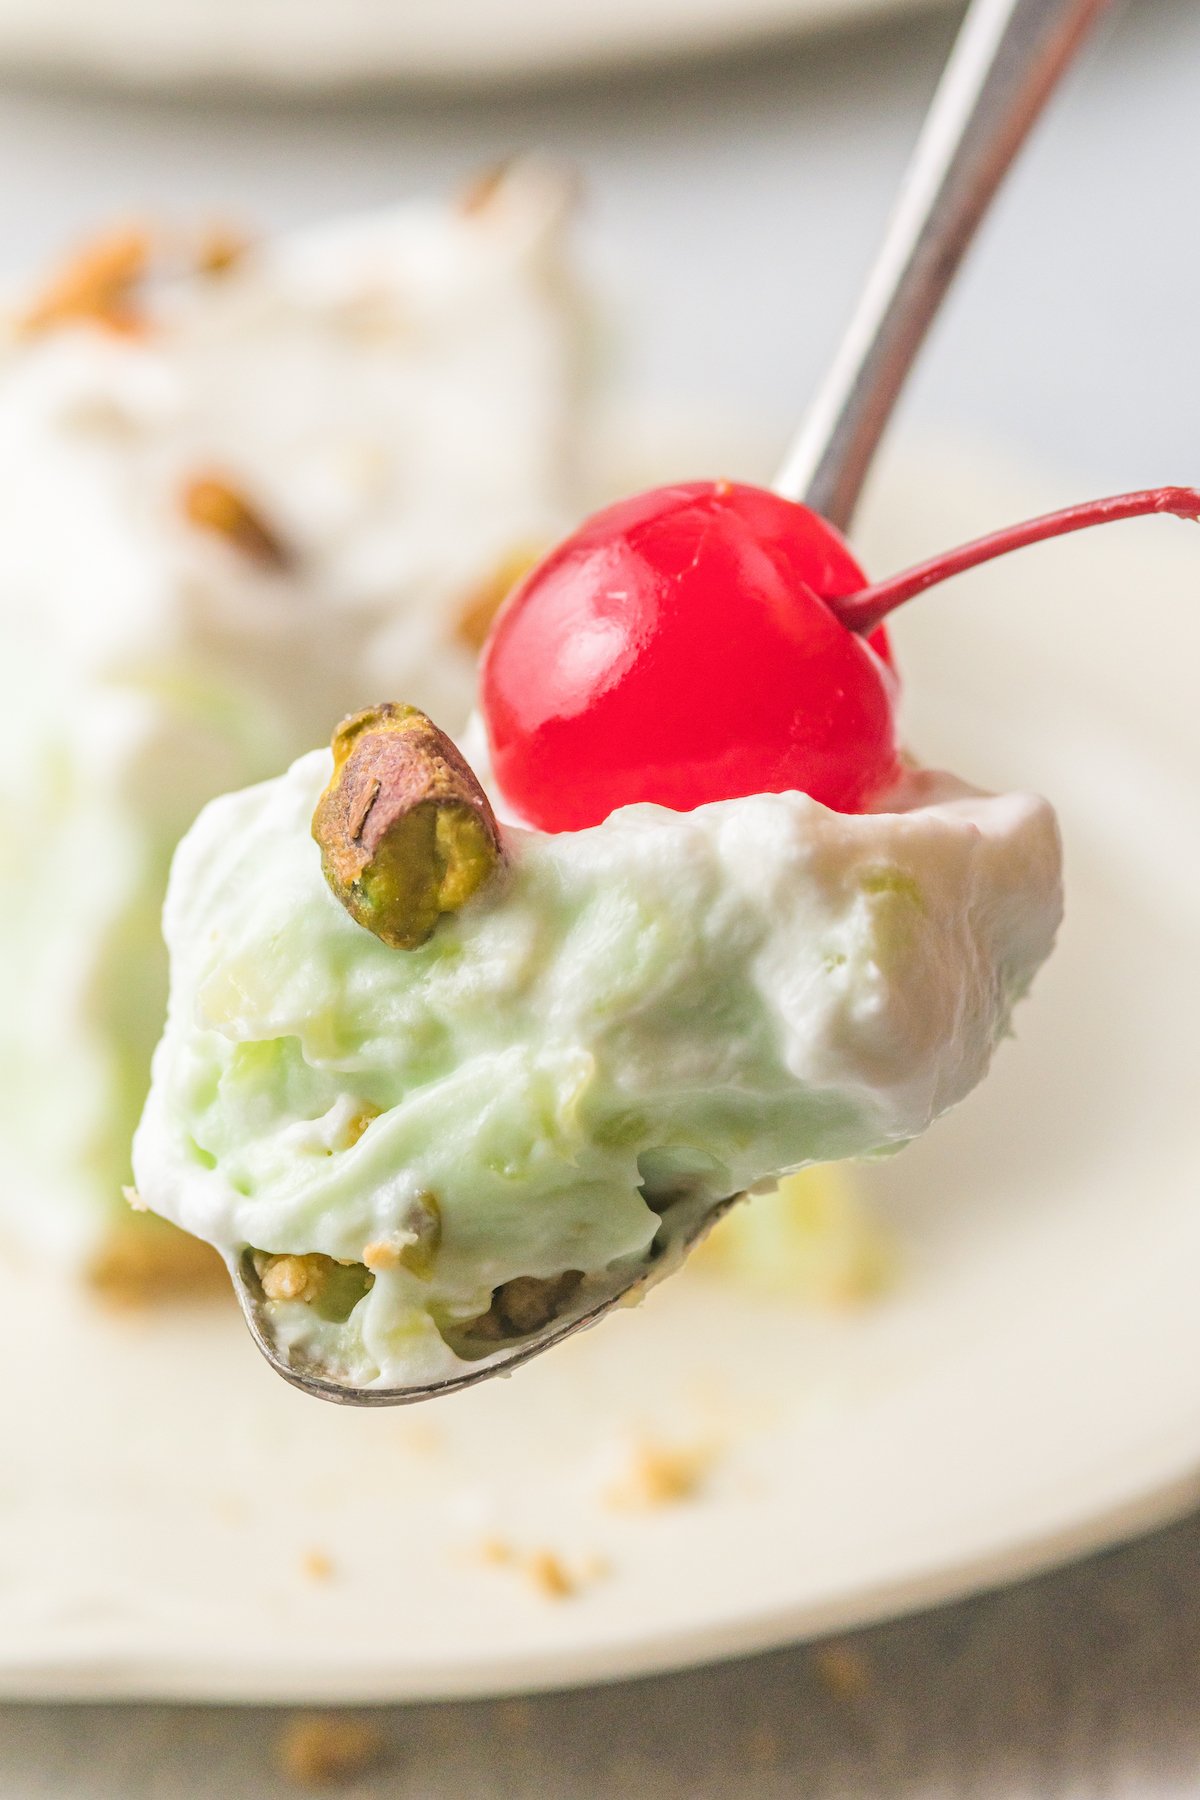 A spoon holds a bite of the pistachio pie and a maraschino cherry. The piece of pie itself is blurred out in the background.